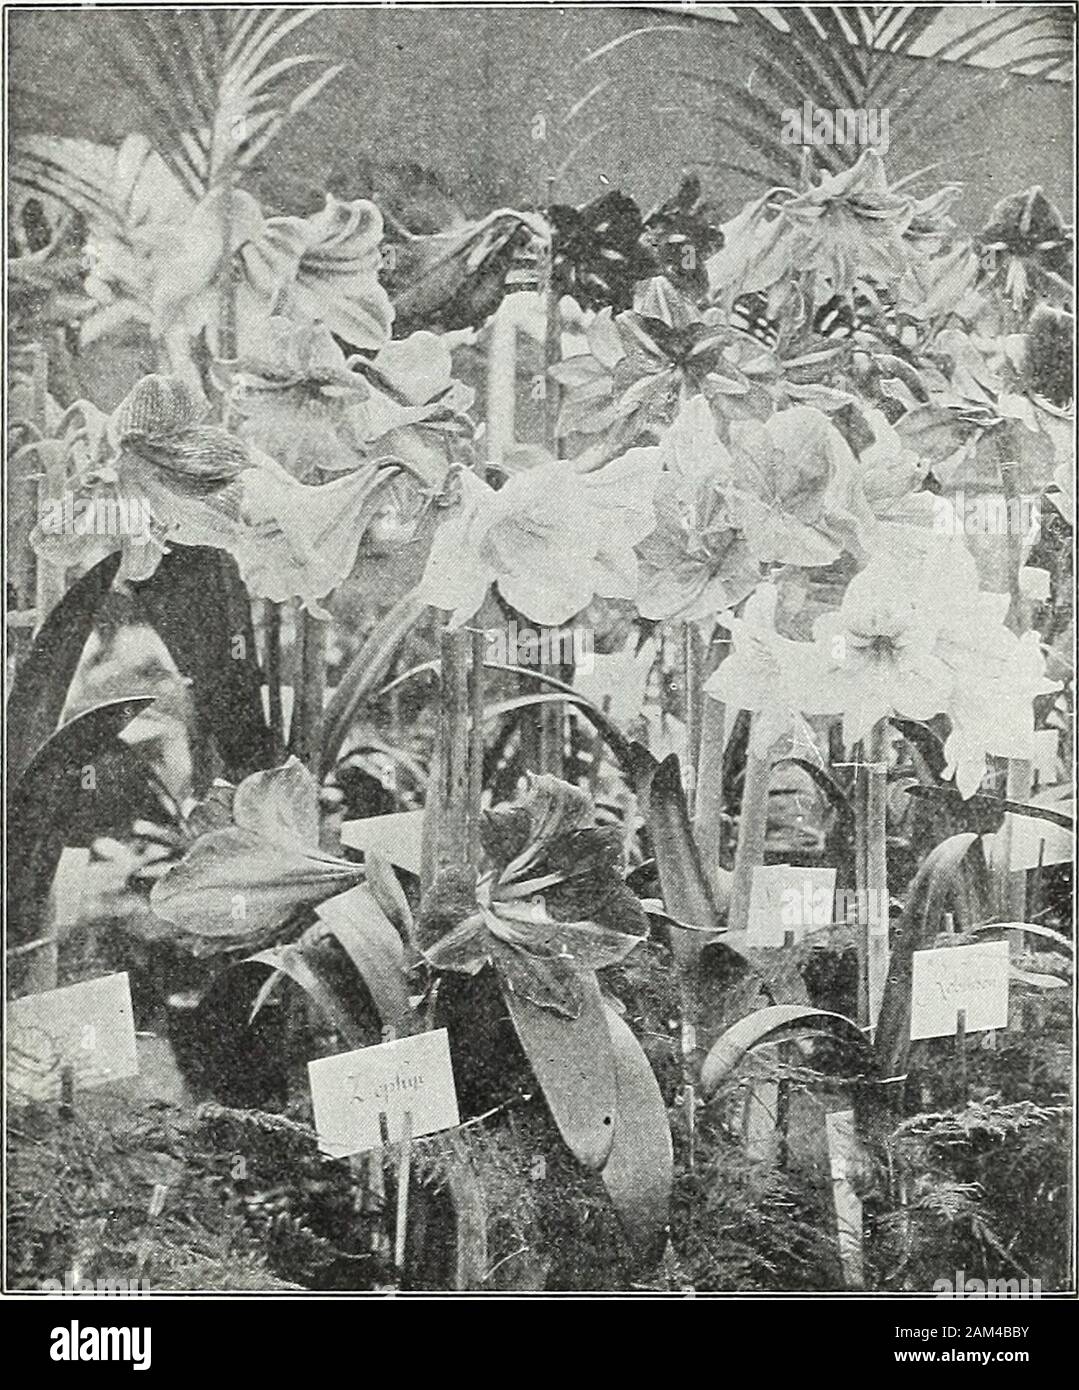 Farquhar's garden annual : 1922 . Thermopsis caroliniana. 98 R. & J. FARQUHAR & COMPANY, BOSTON. SUMMER-FLOWERING BULBS. FARQUHARS SUMMER-FLOWERING BULBS.. Amaryllis Hippeastrmn, New Hybrids. AMARYLLIS. C/UltUF6. The bulbs should be placed where they will be always slightly moistand warm under the benches of a greenhouse, for example; do not pot upthe bulbs before the flower buds appear; when first potted give very littlewater and promote growth by gi%Tng moderate bottom heat. Hlppeastrum. New Hybrids. {Vittata.) The finest race ofAmatyllis in cultivation; exceeding in tlie size and fine form Stock Photo